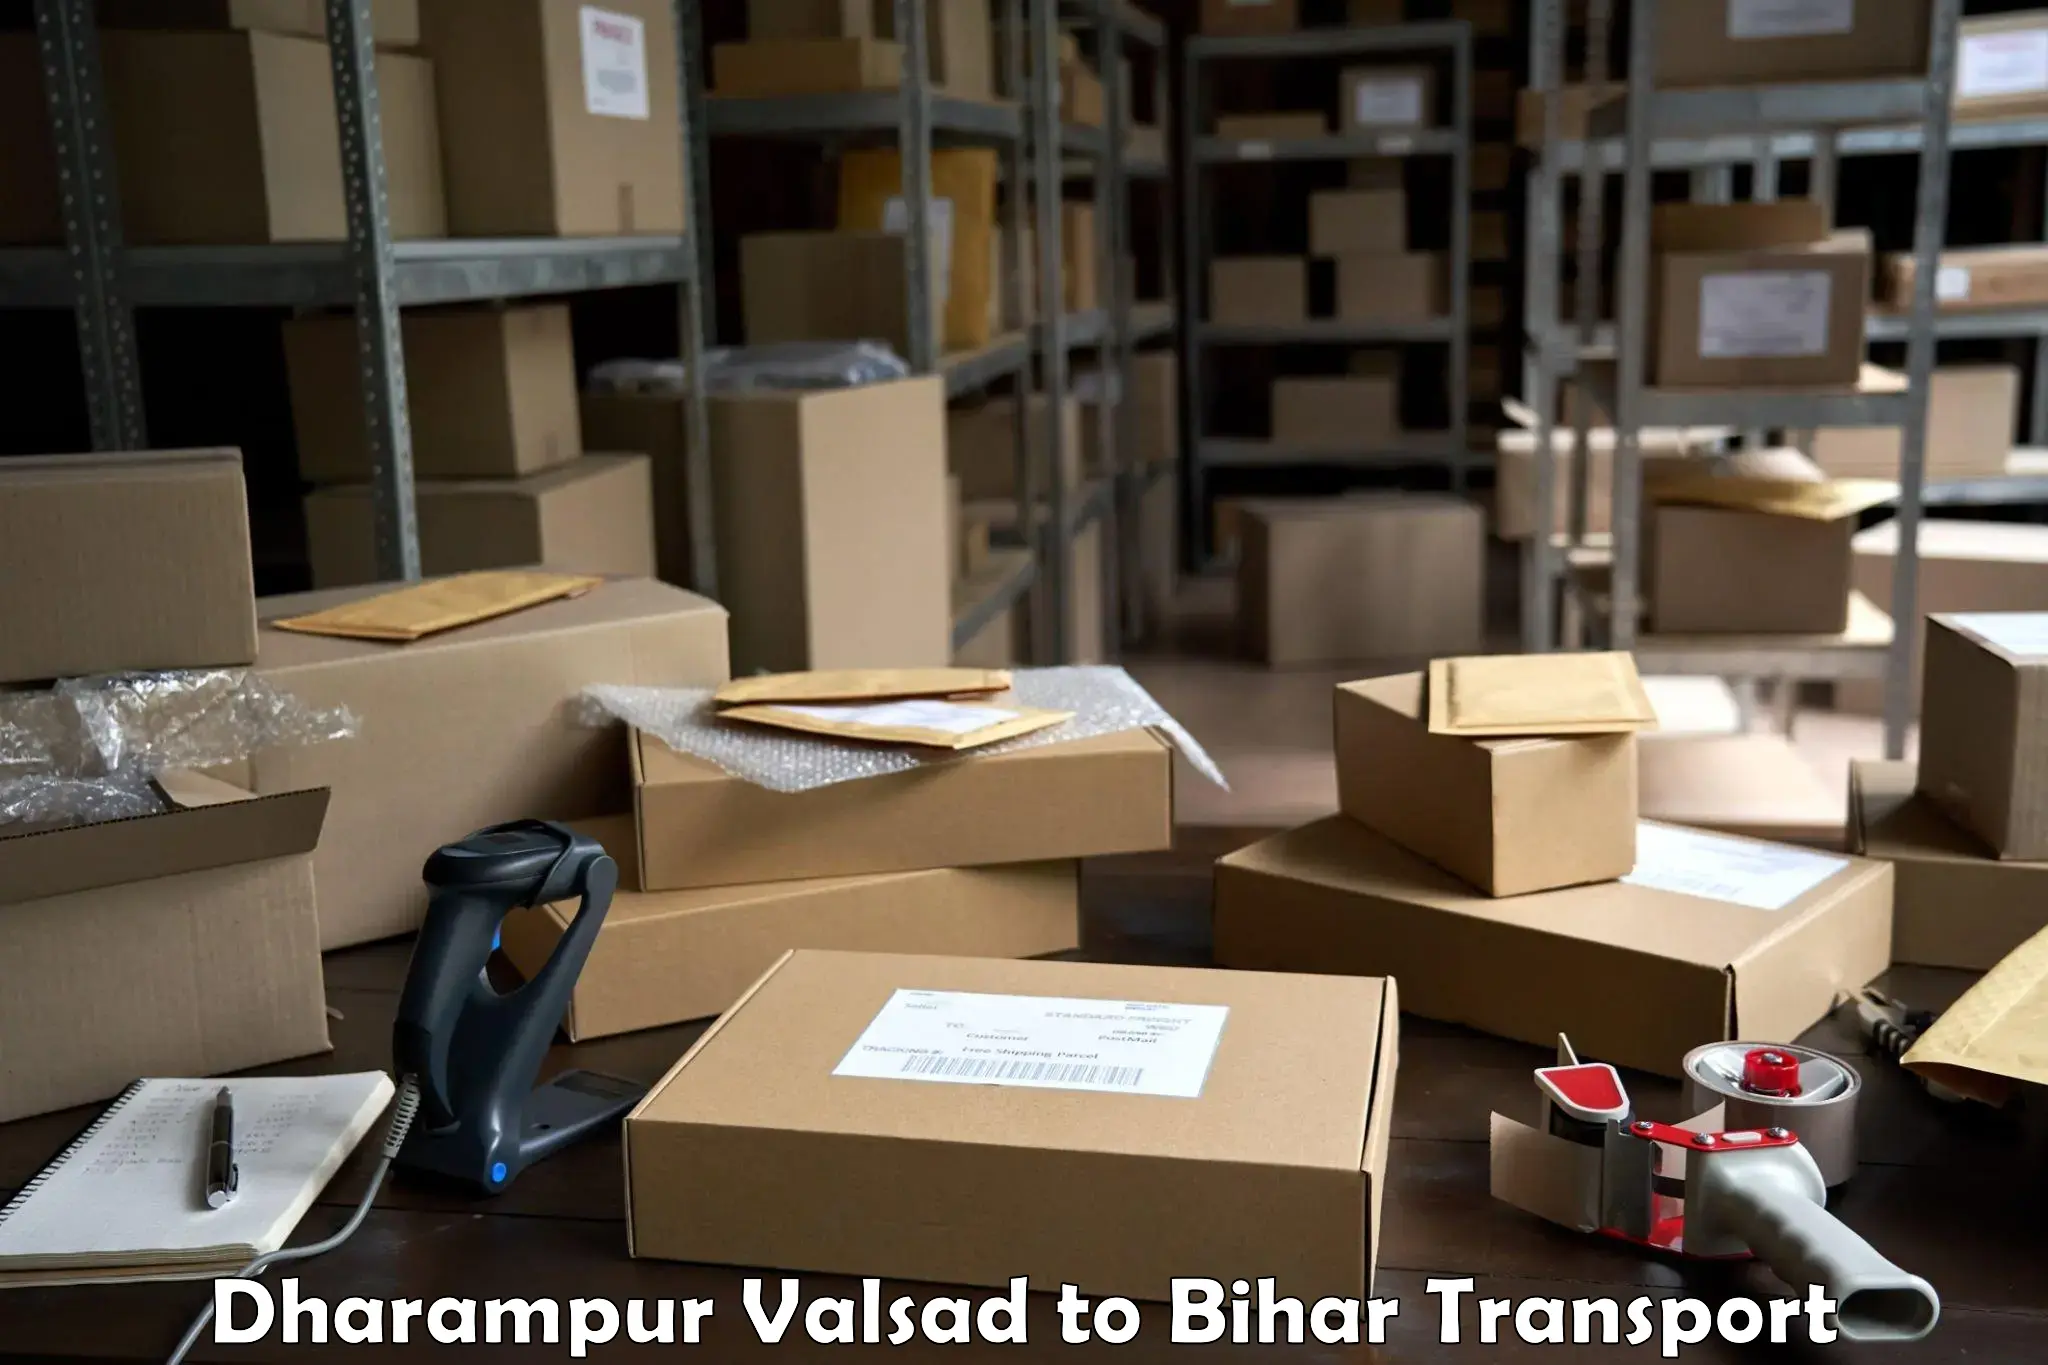 Cargo transport services Dharampur Valsad to Bhojpur